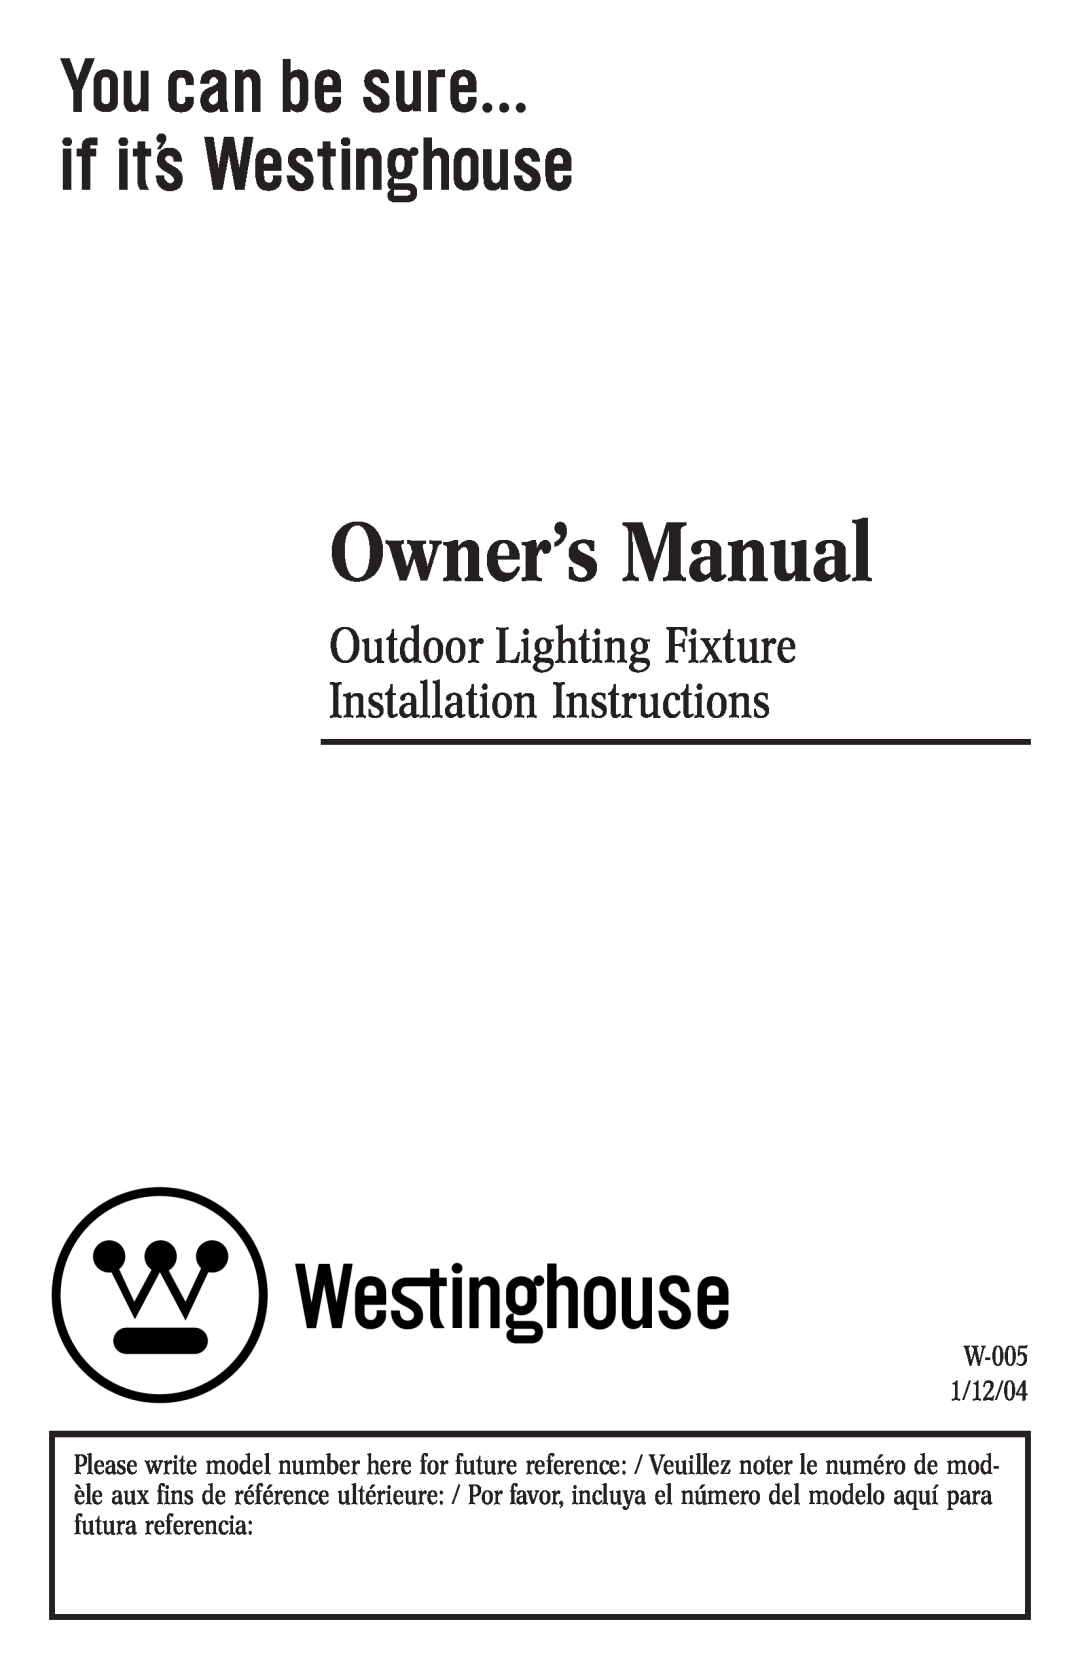 Westinghouse W-005 owner manual Outdoor Lighting Fixture Installation Instructions 